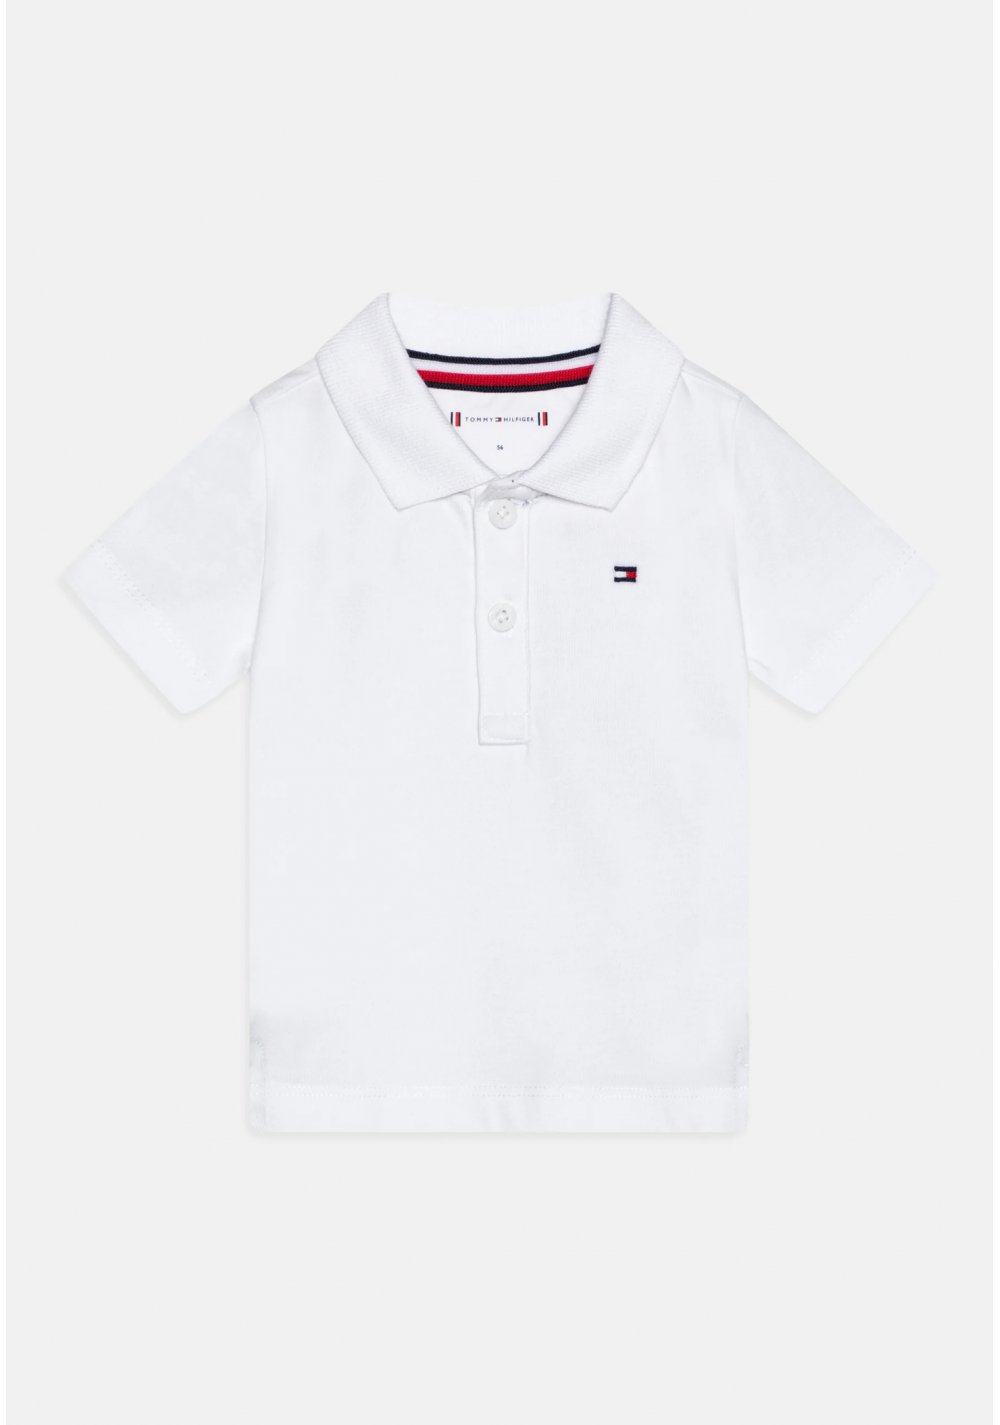 Tommy Hilfiger bambini BABY FLAG UNISEX - Polo bianca in cotone